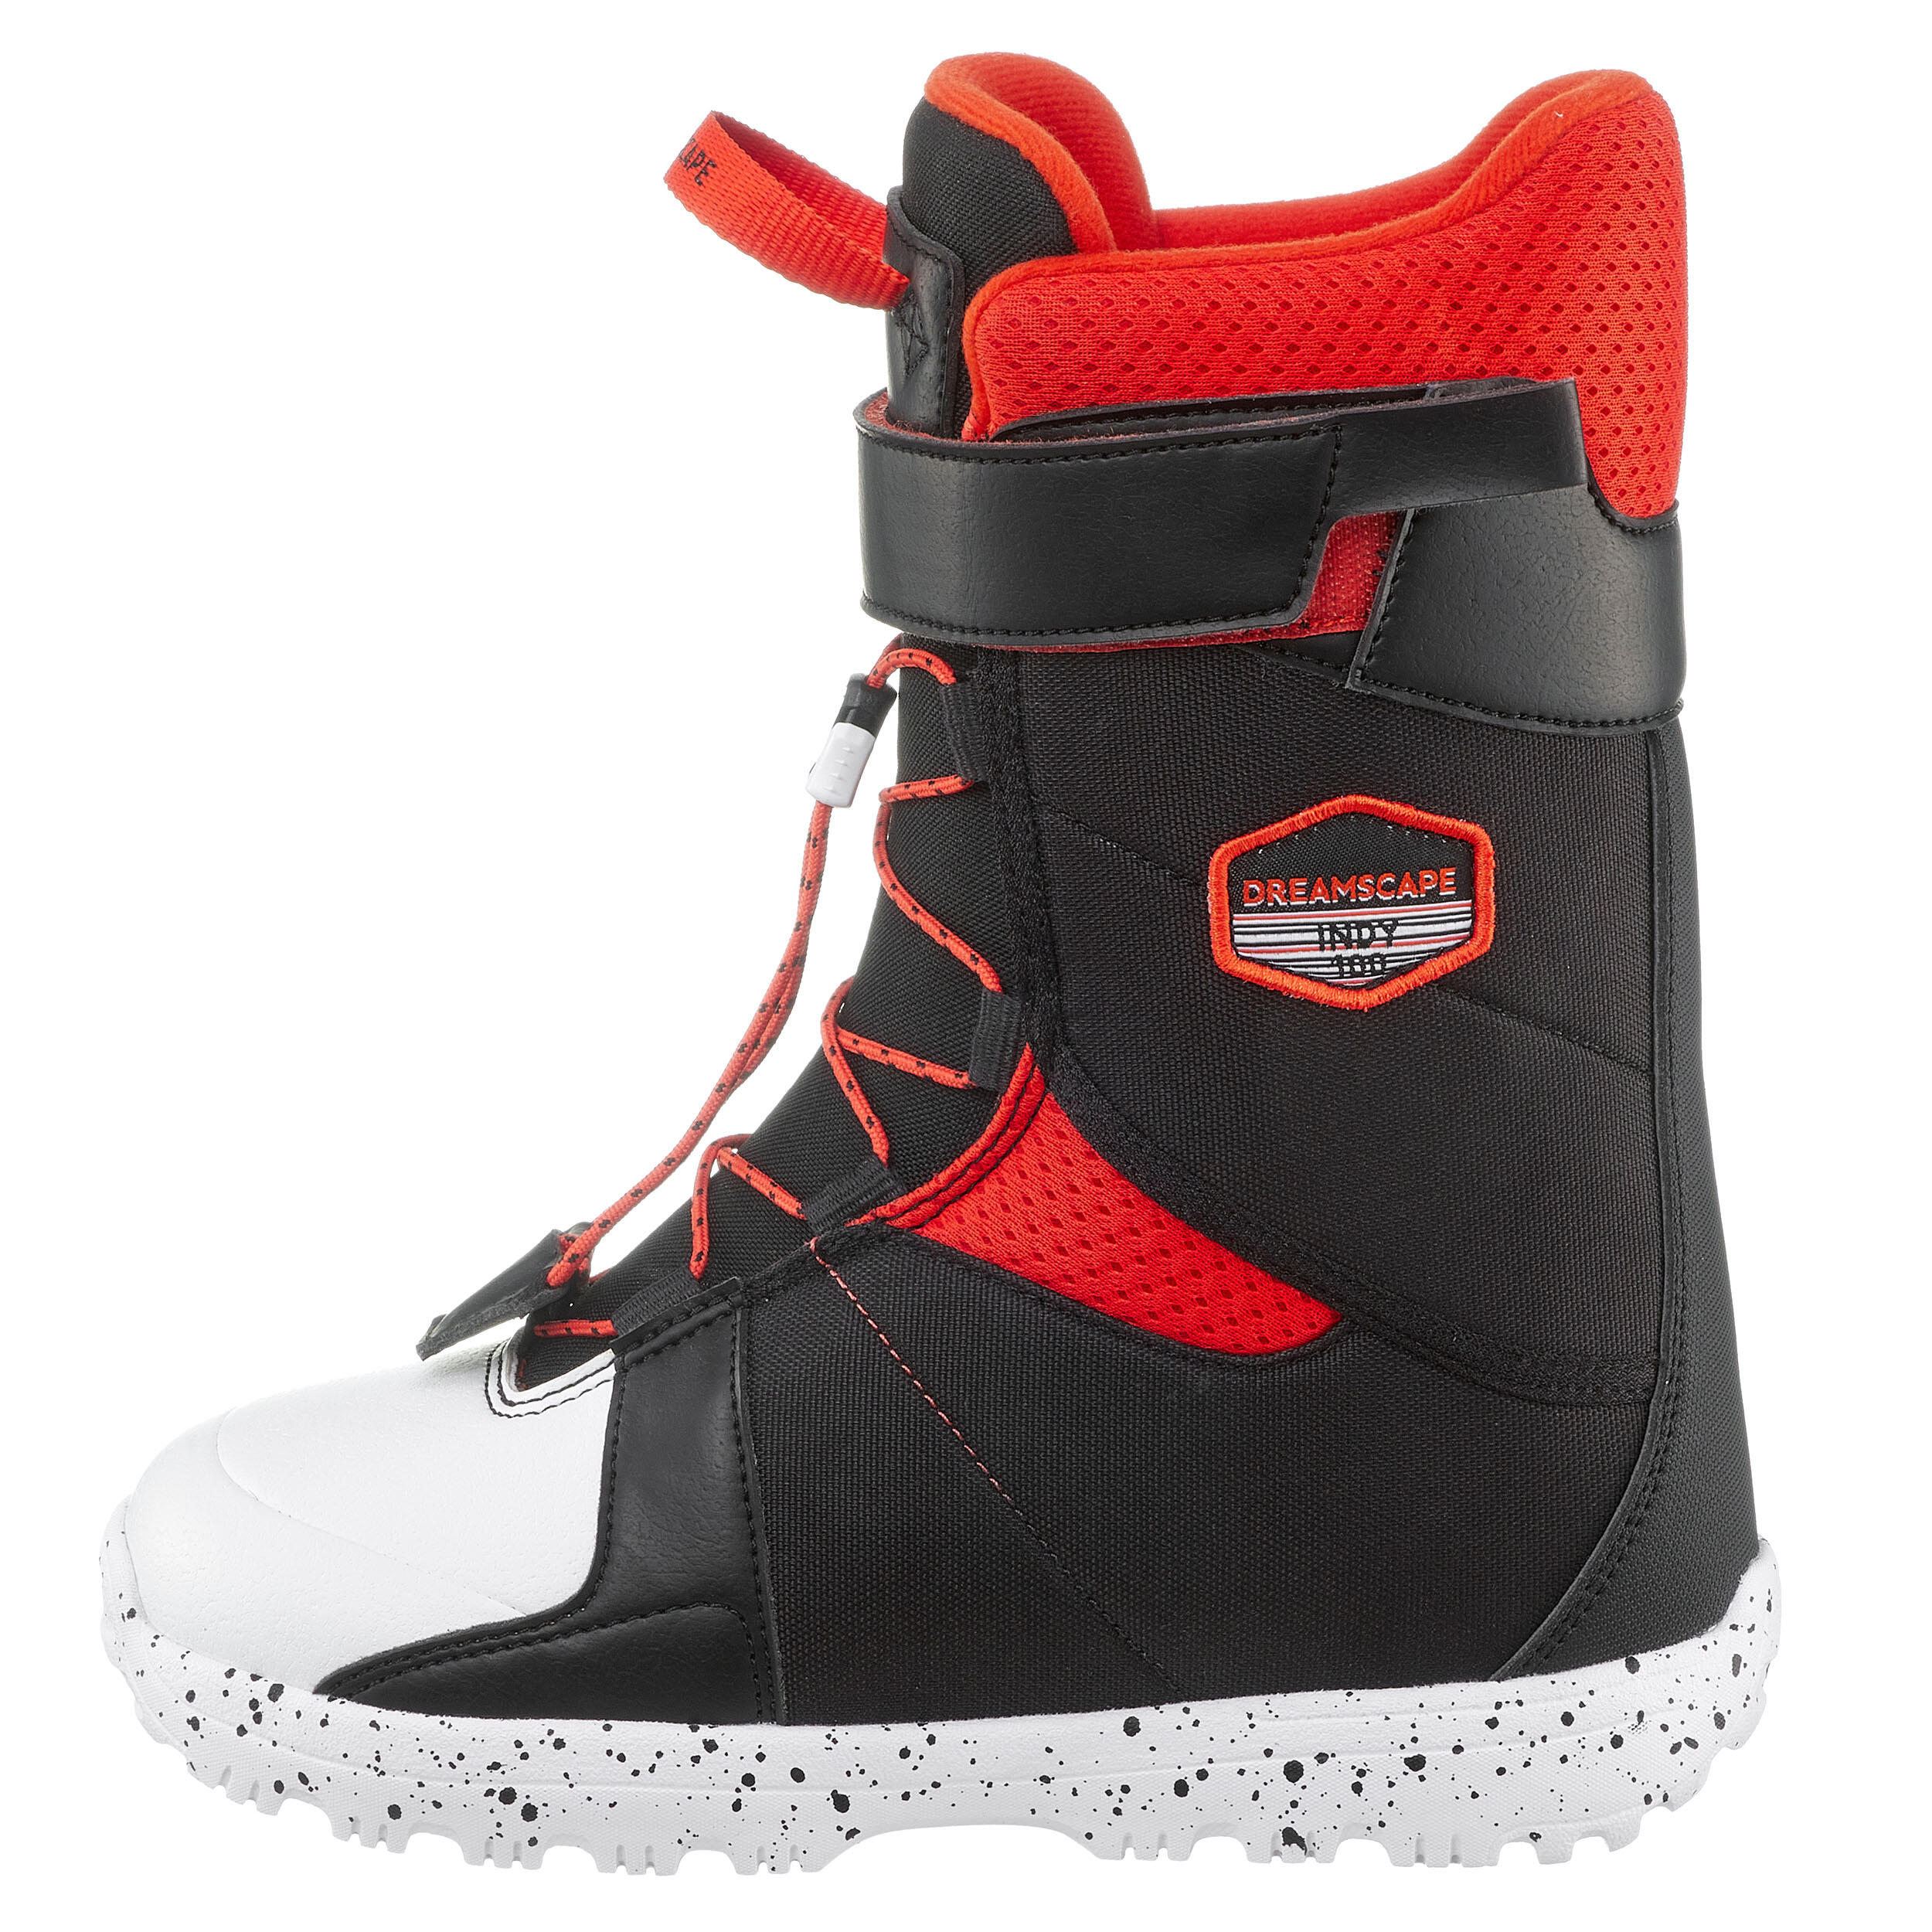 Kids’ Quick Fastening Snowboard Boots - Indy 100 - S 5/9